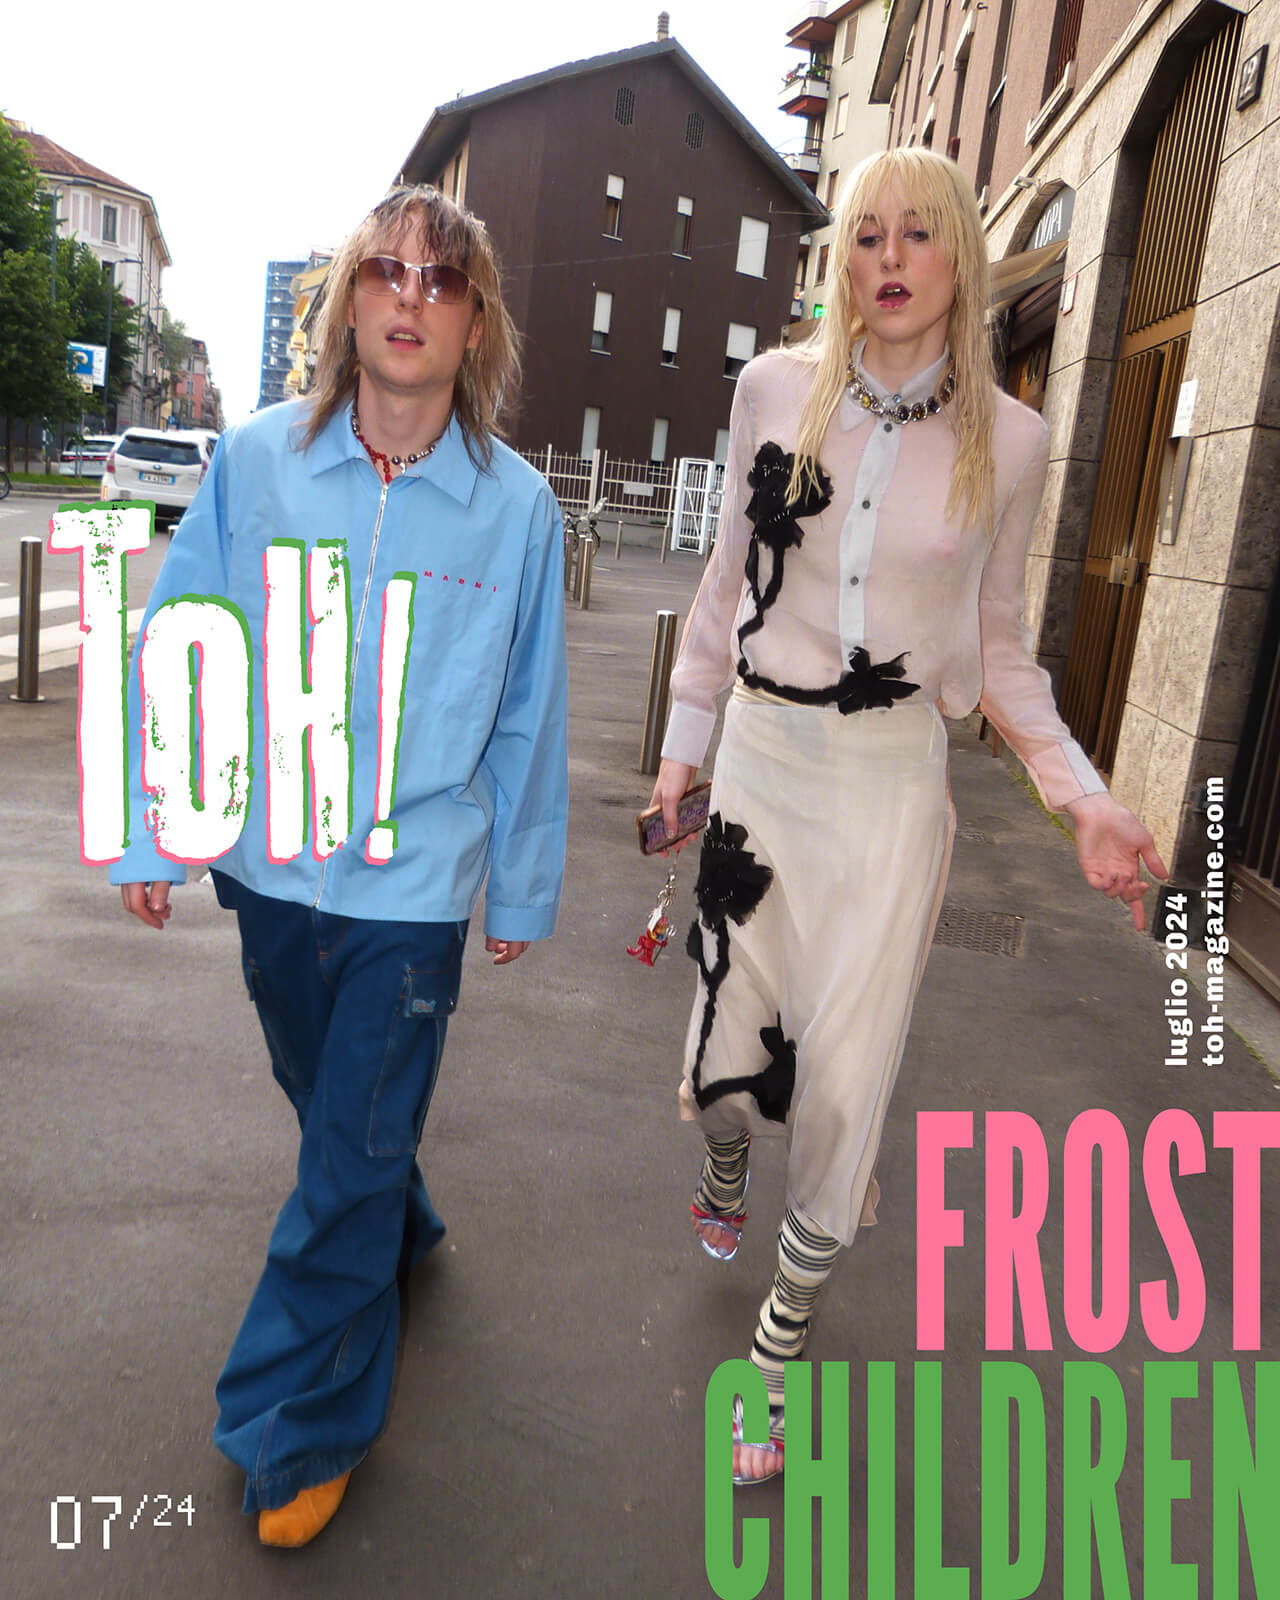 Frost_Children_Cover_story